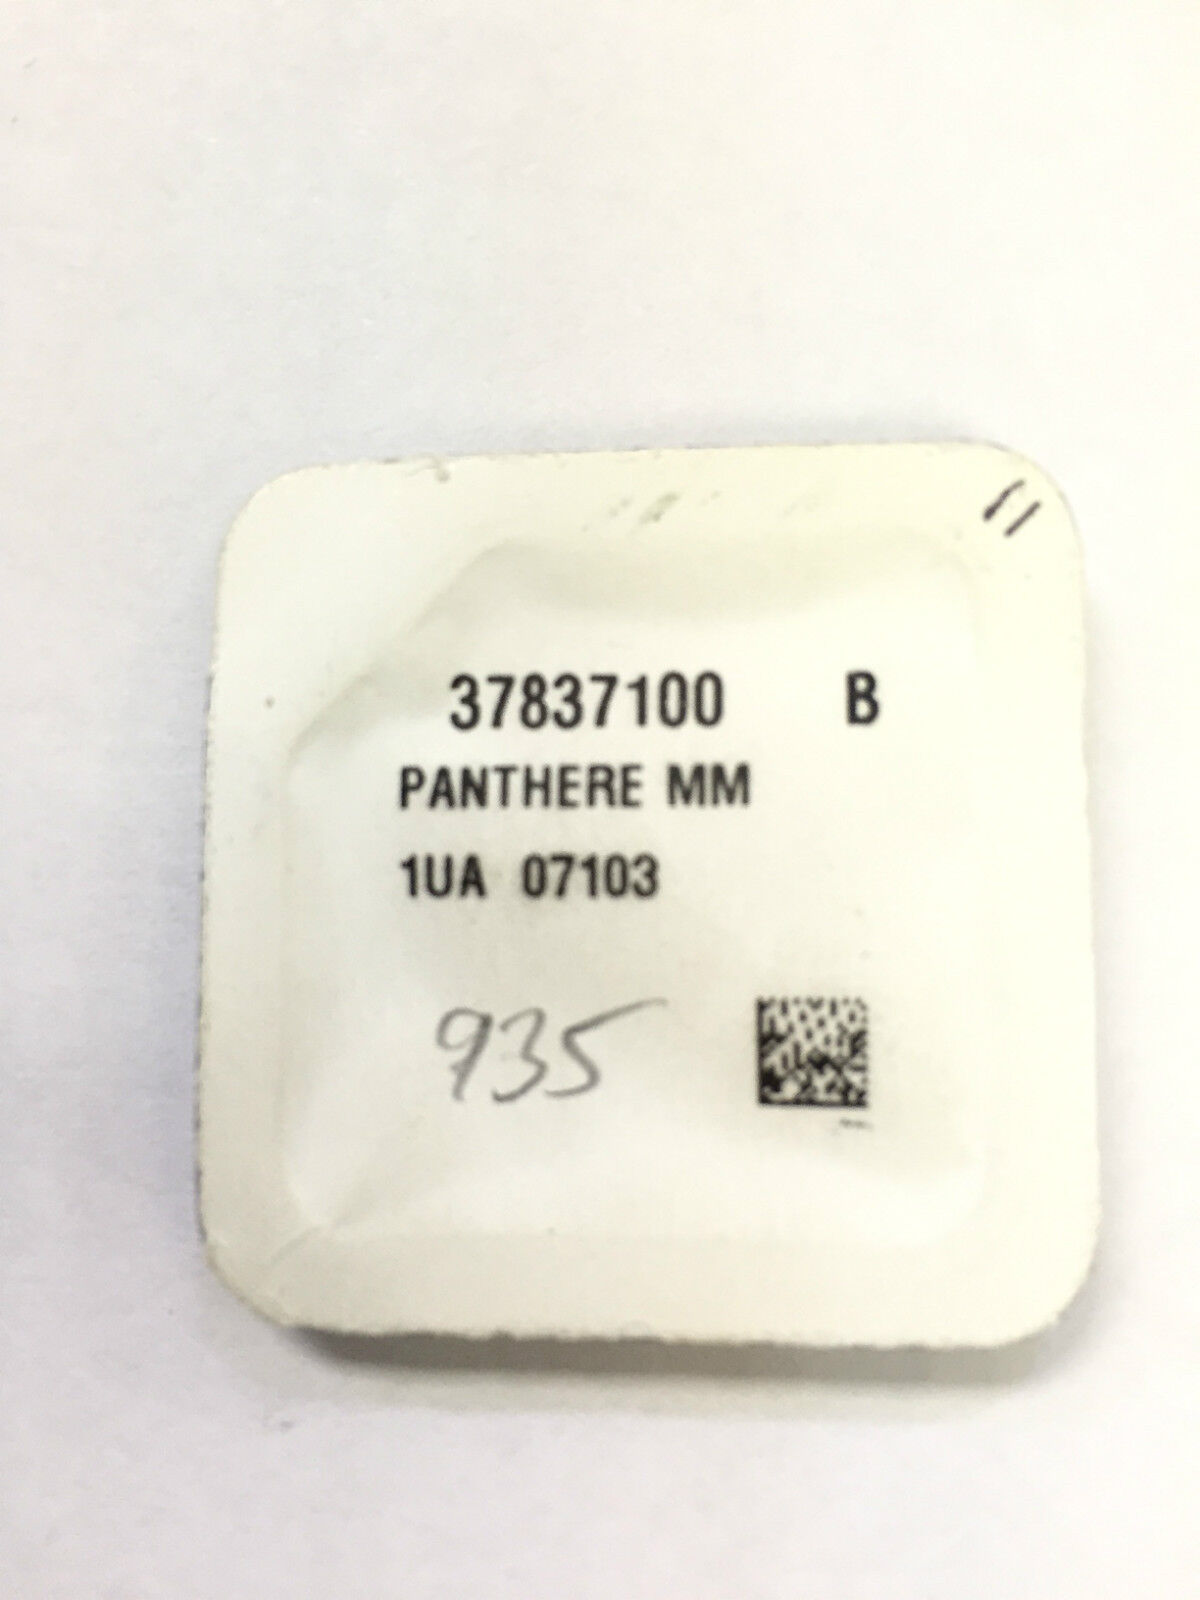 Cartier Panthere MM (medium size) Sapphire Crystal - Part 37837100 - NEW